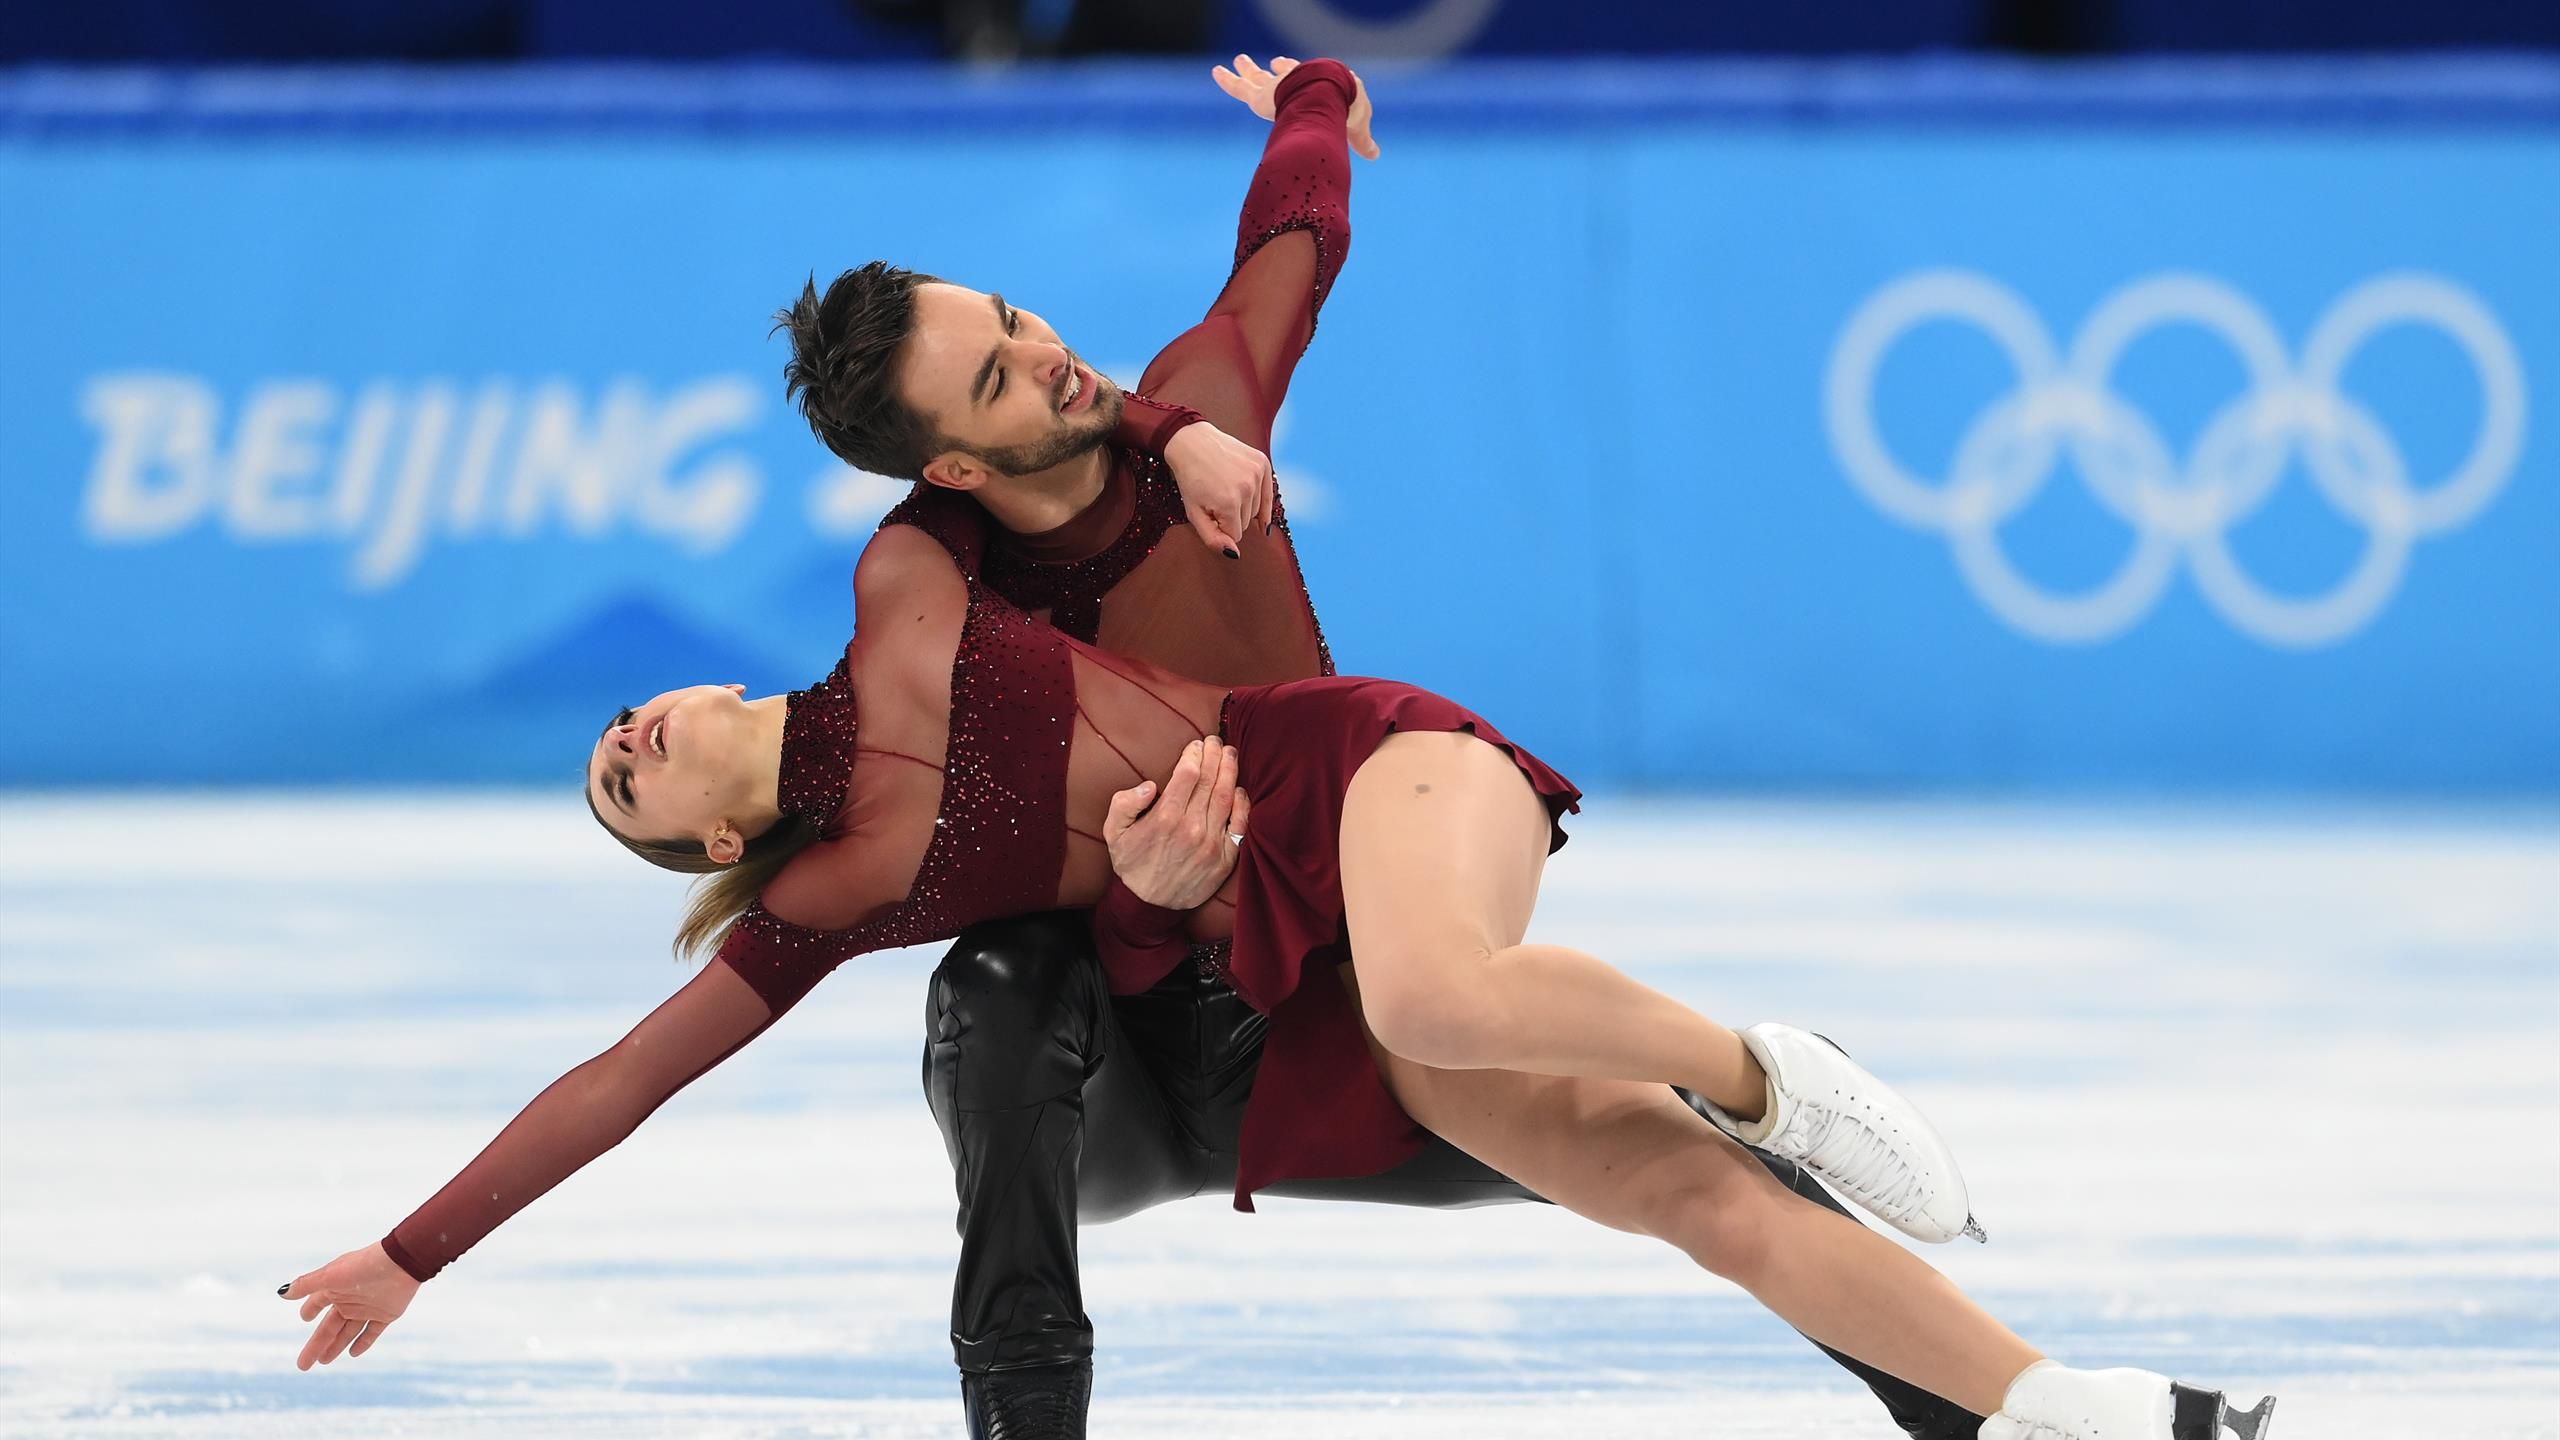 Winter Olympics 2022 - French pair set new ice dance world record as Team GB skate rocking routine to qualify